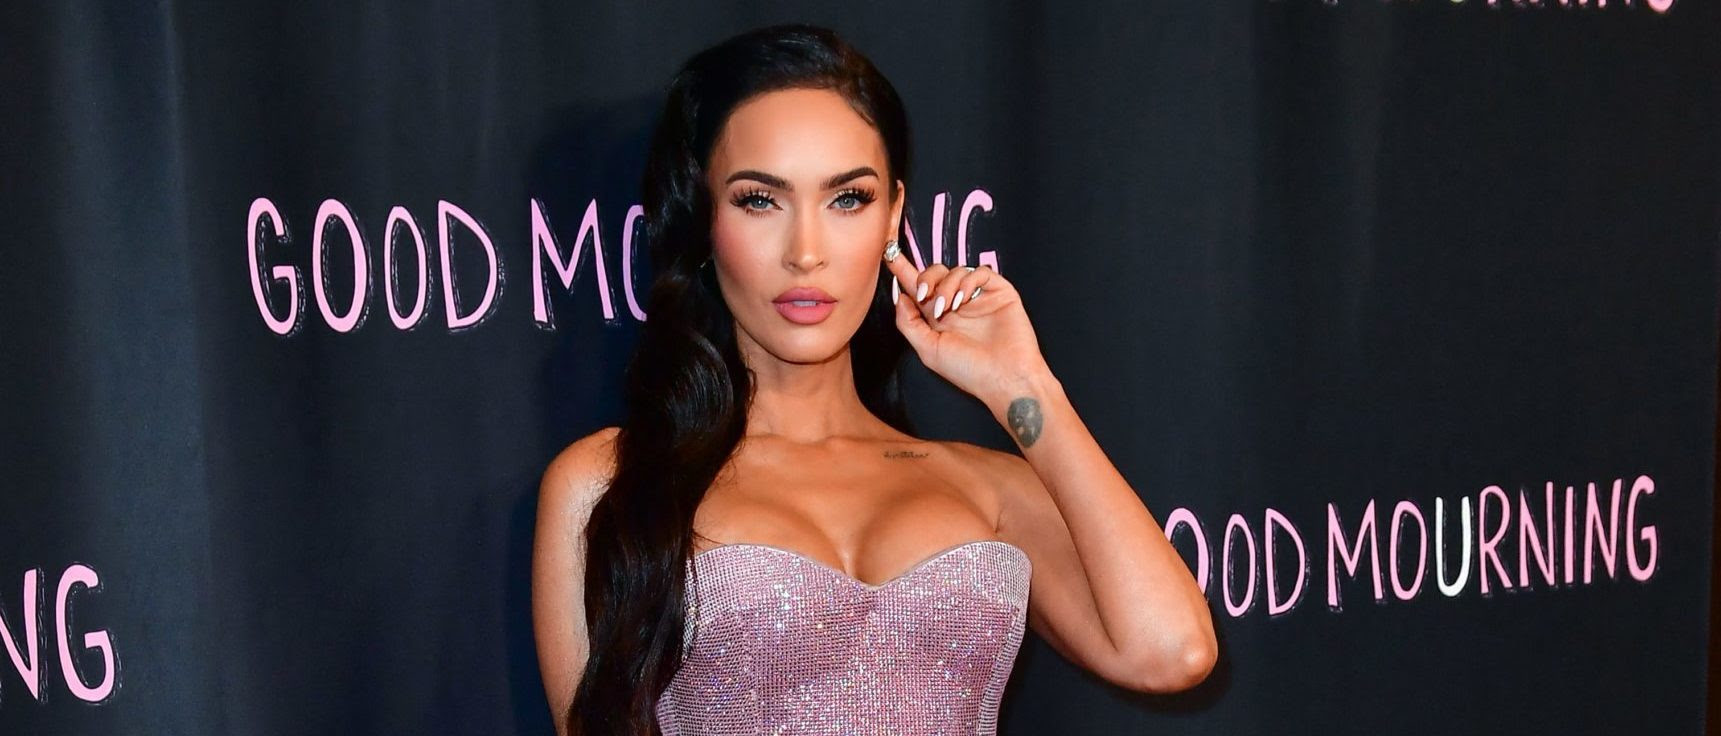 Megan Fox Compares Her Head To An Edamame Bean, But Her Sheer Outfit Has Fans Looking In A Different Direction